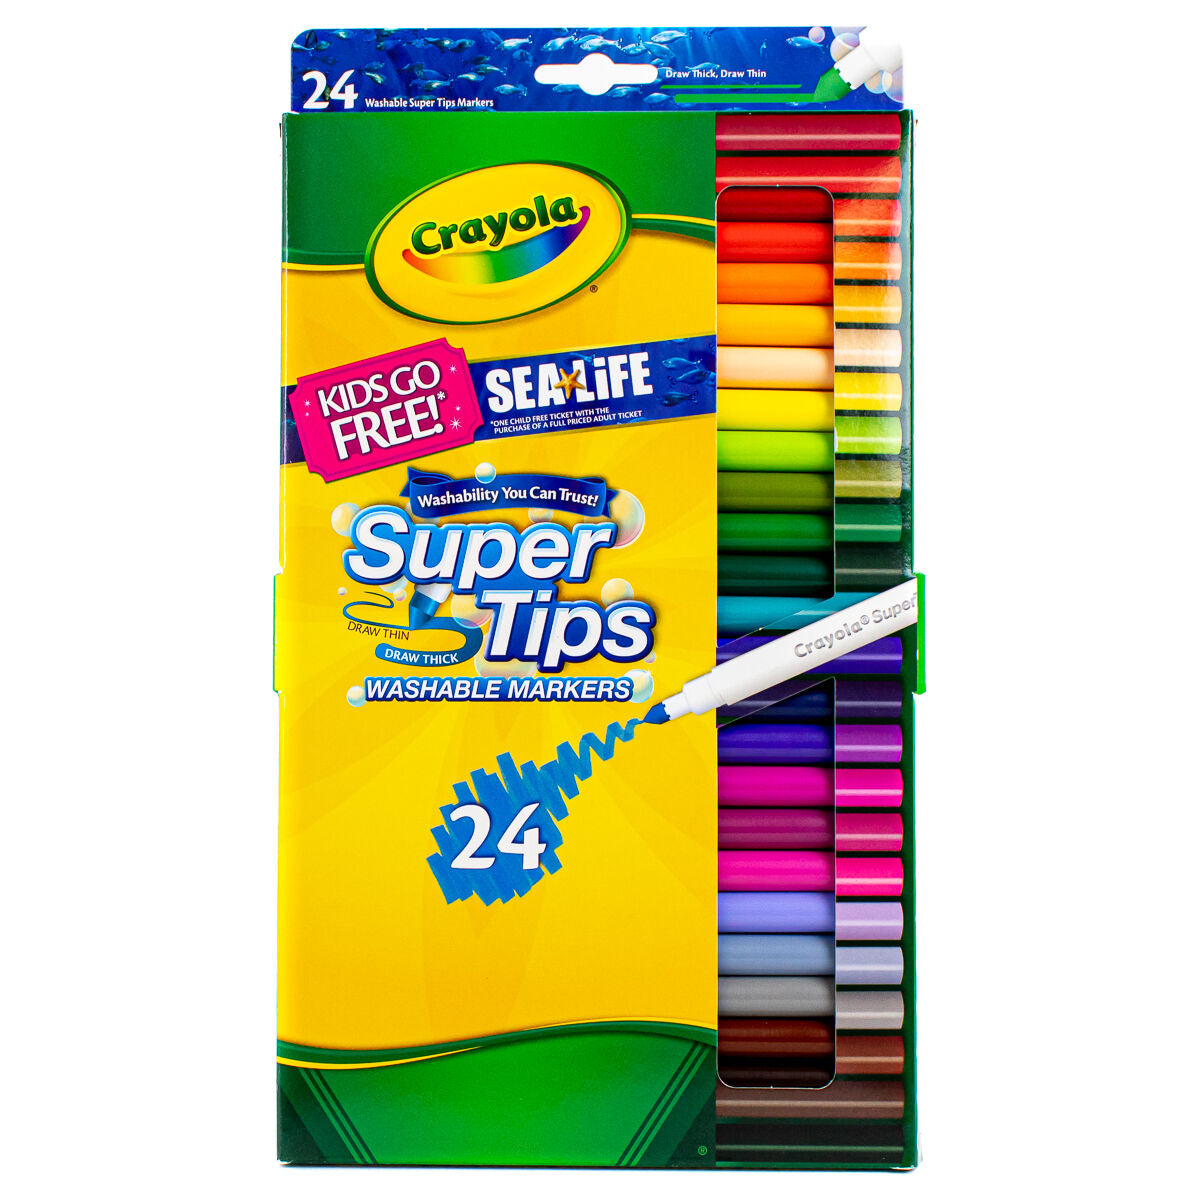  Crayola Super Tips Washable Markers Age 3+ - 50 Count